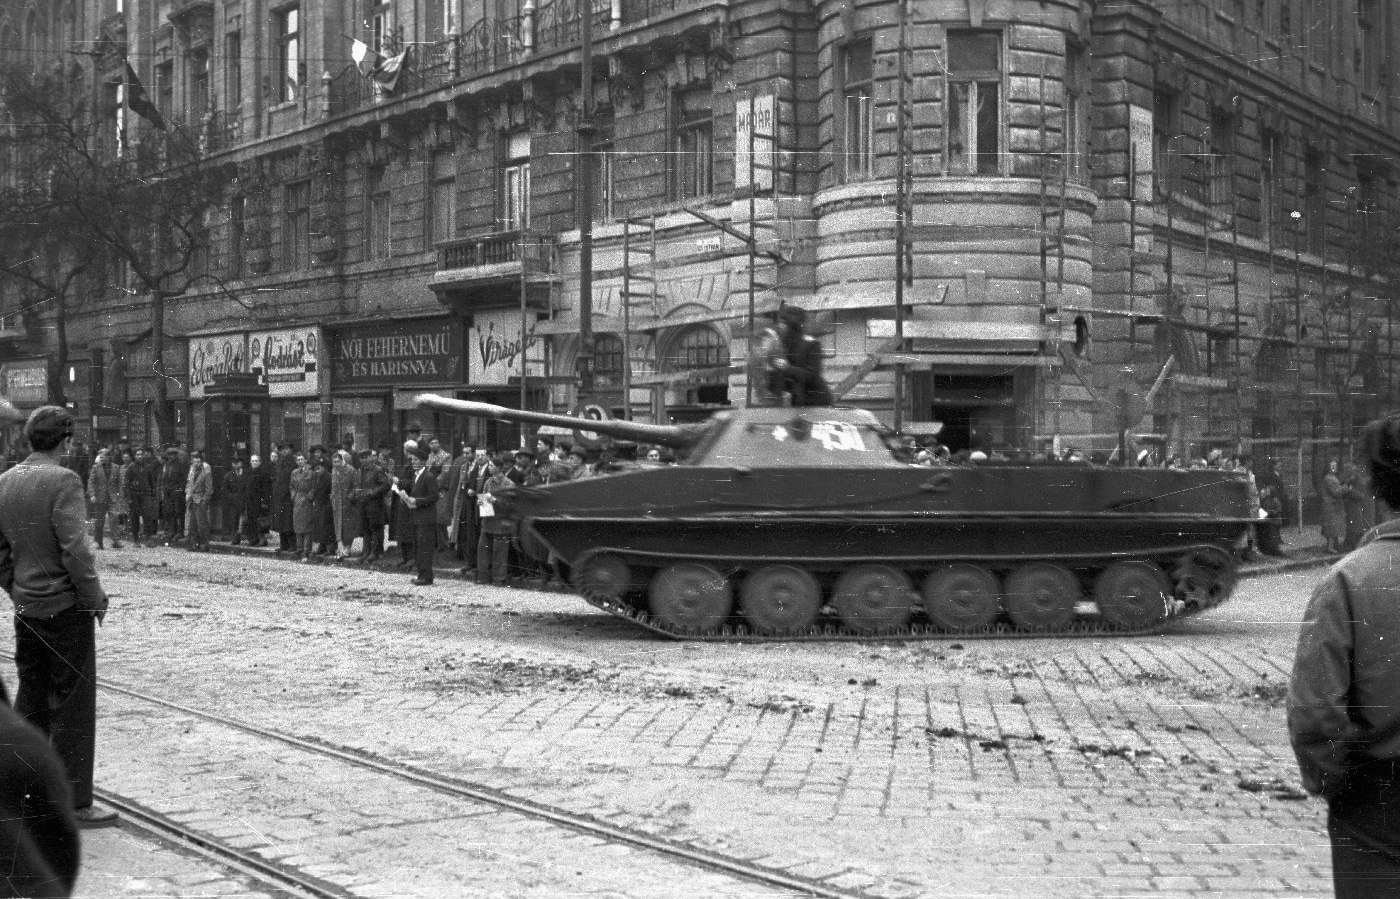 soviet pt-76 tank during invasion of hungary in 1956